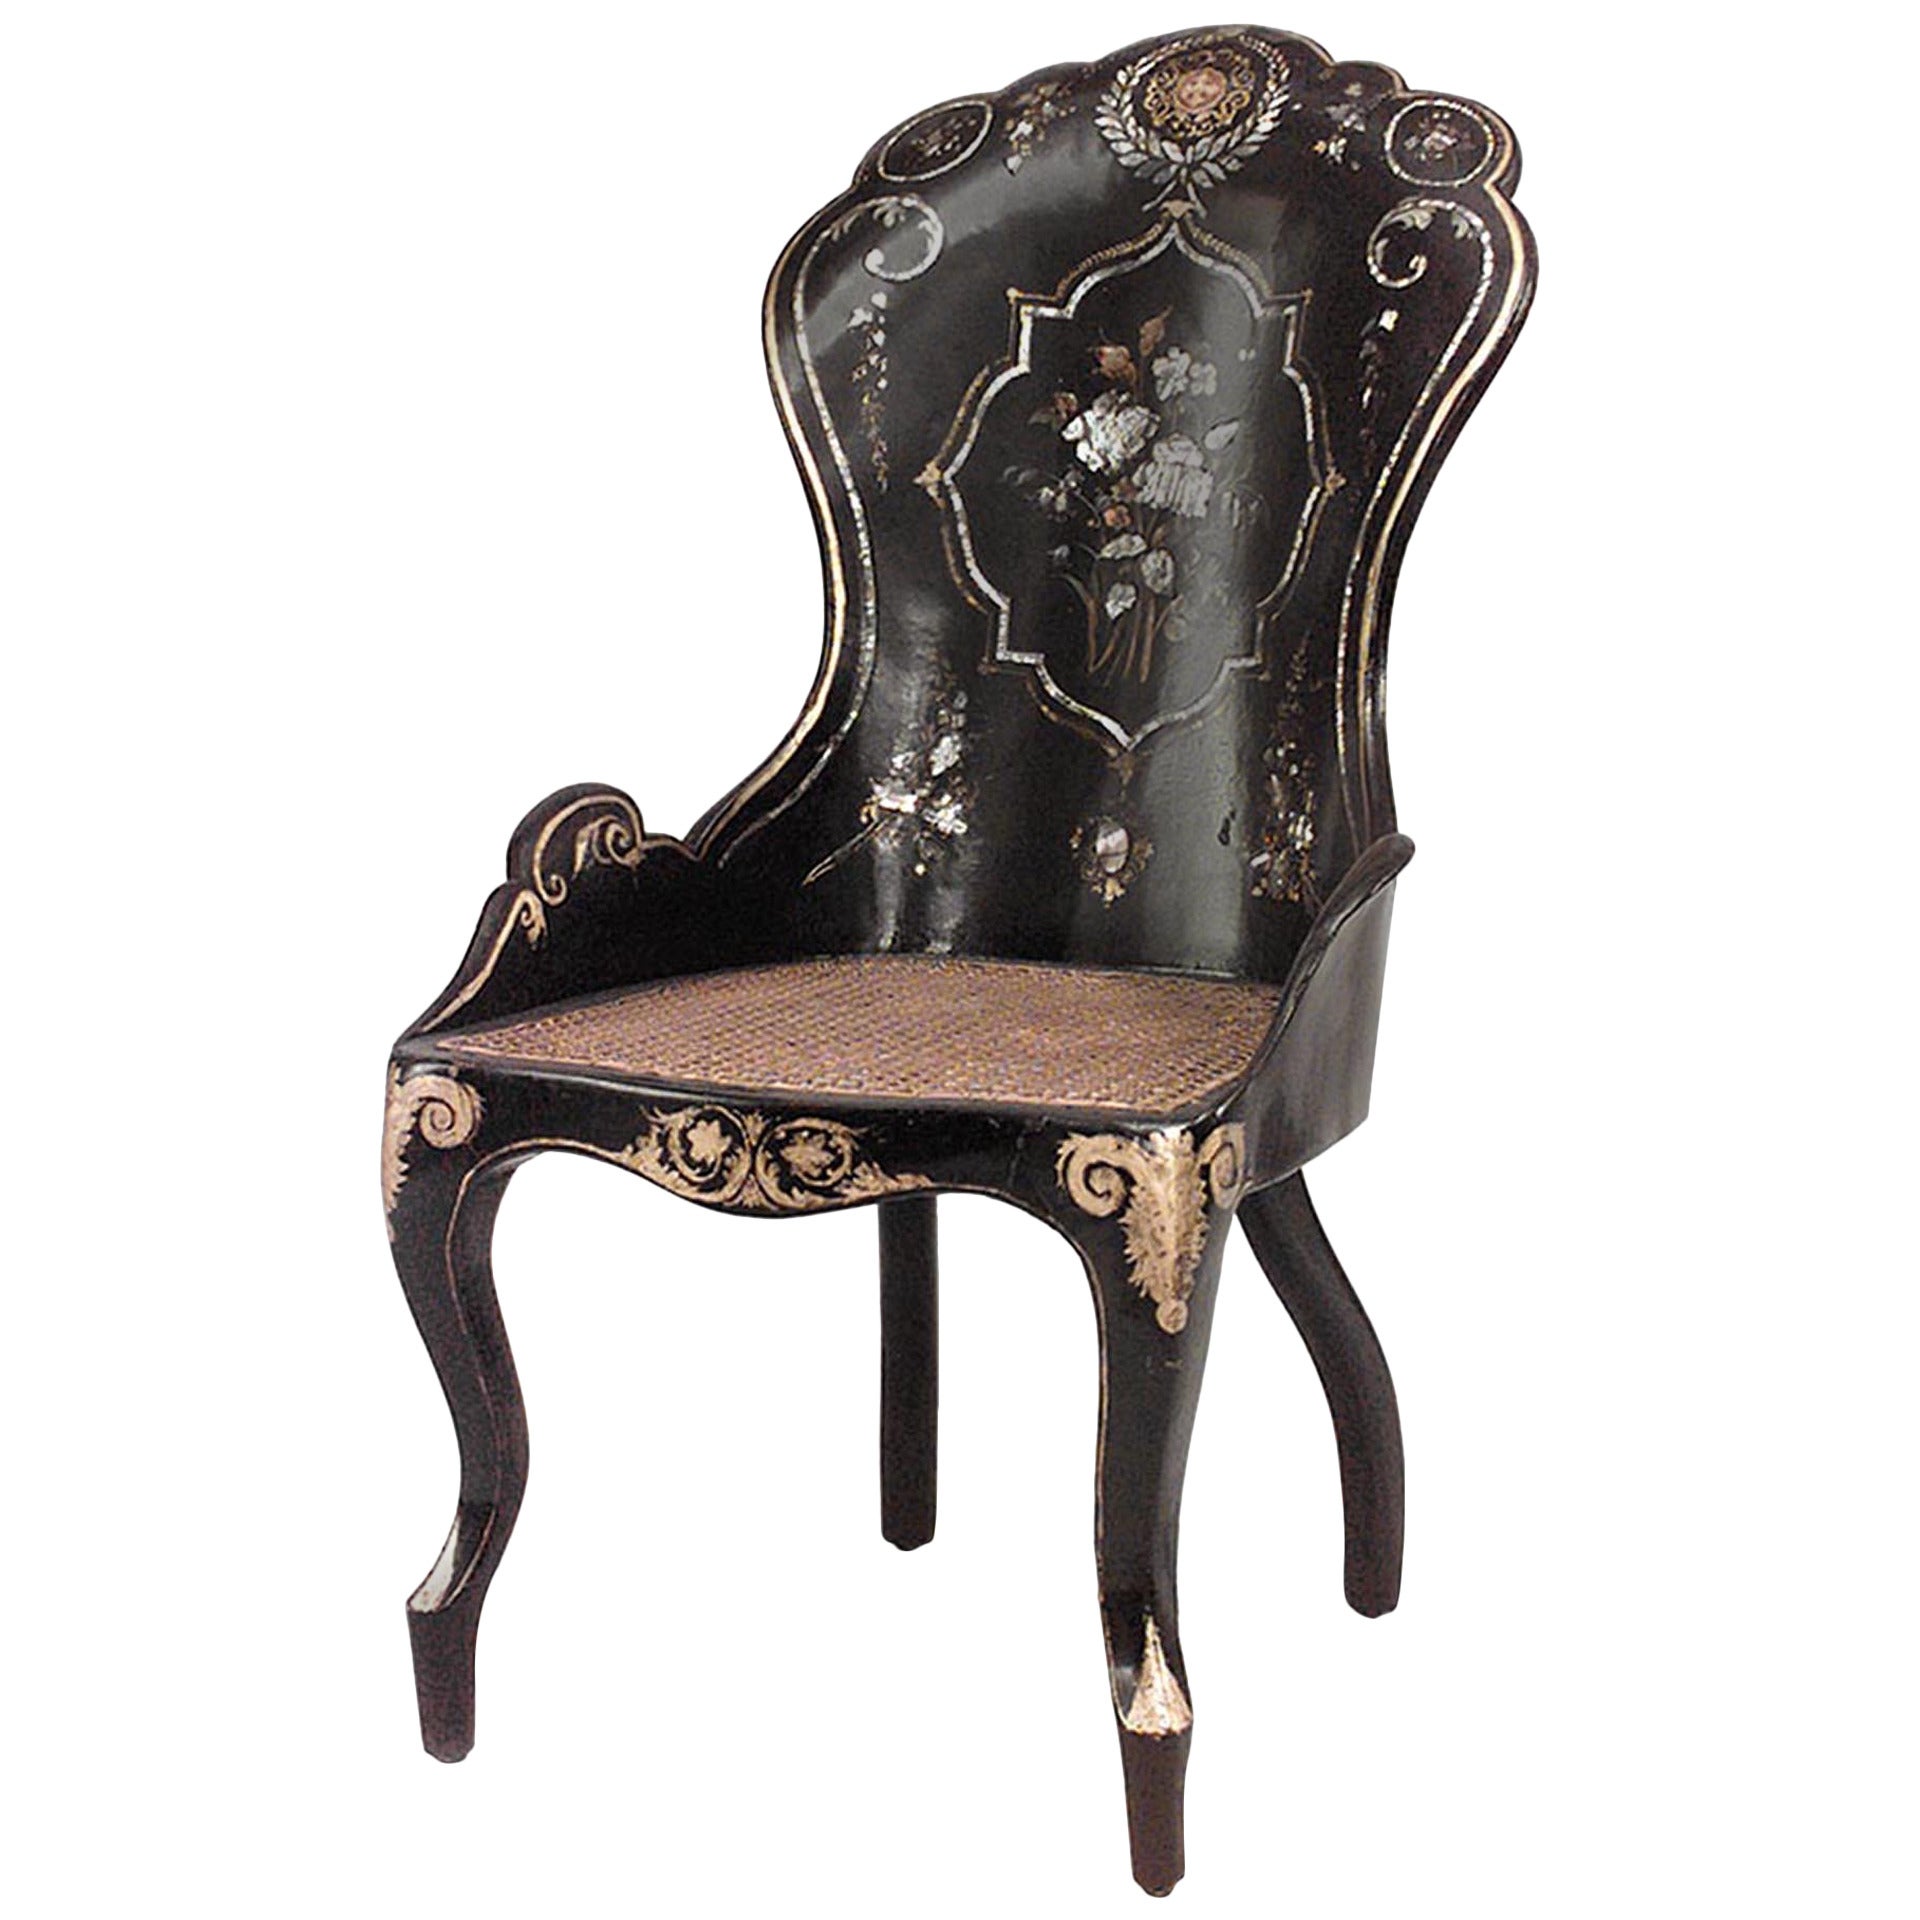 19th c. English Papier Mache Pearl-Inlaid Lacquered Side Chair